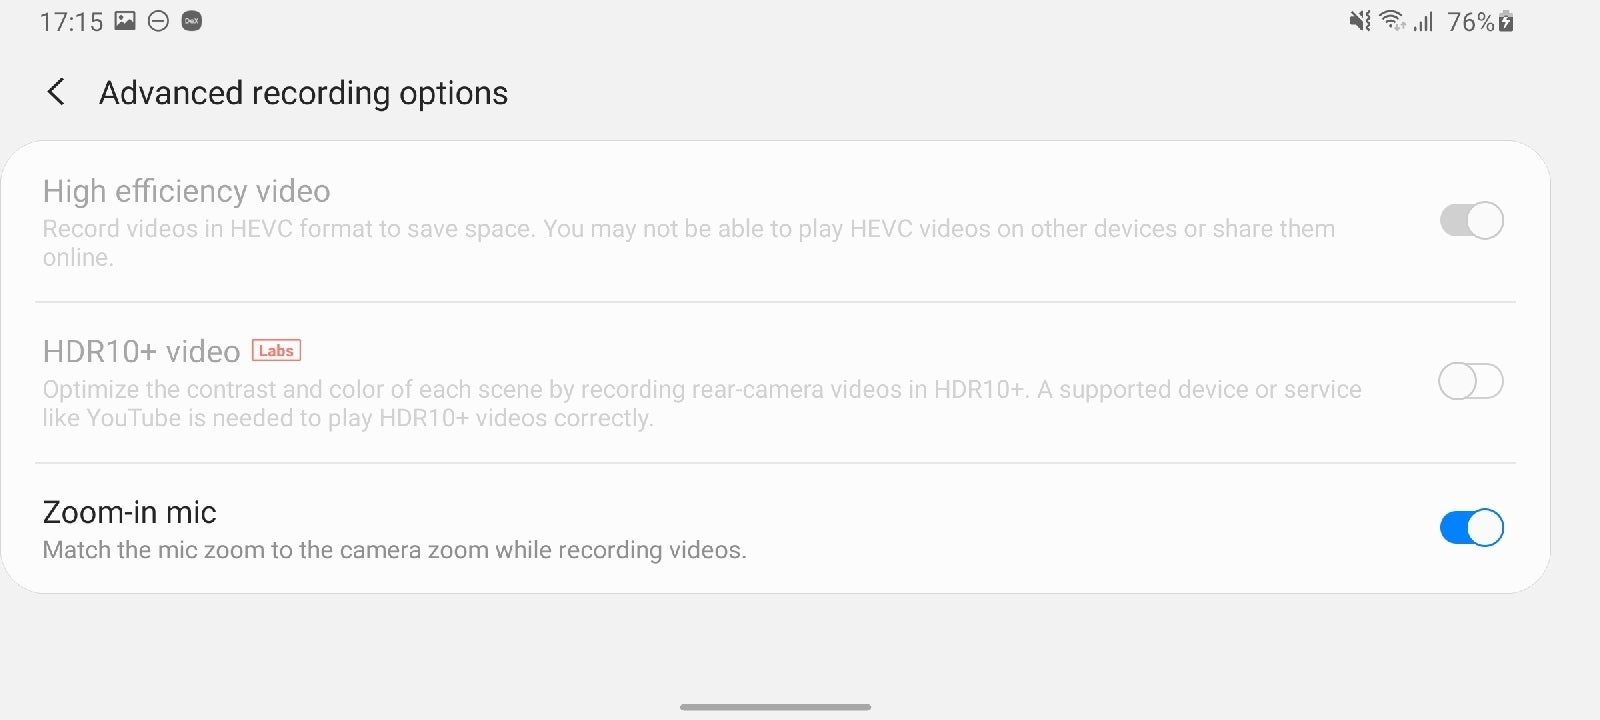 Enable zoom-in mic - Samsung Galaxy S20, S20 Plus, S20 Ultra camera tips & tricks: How to make the most out of it